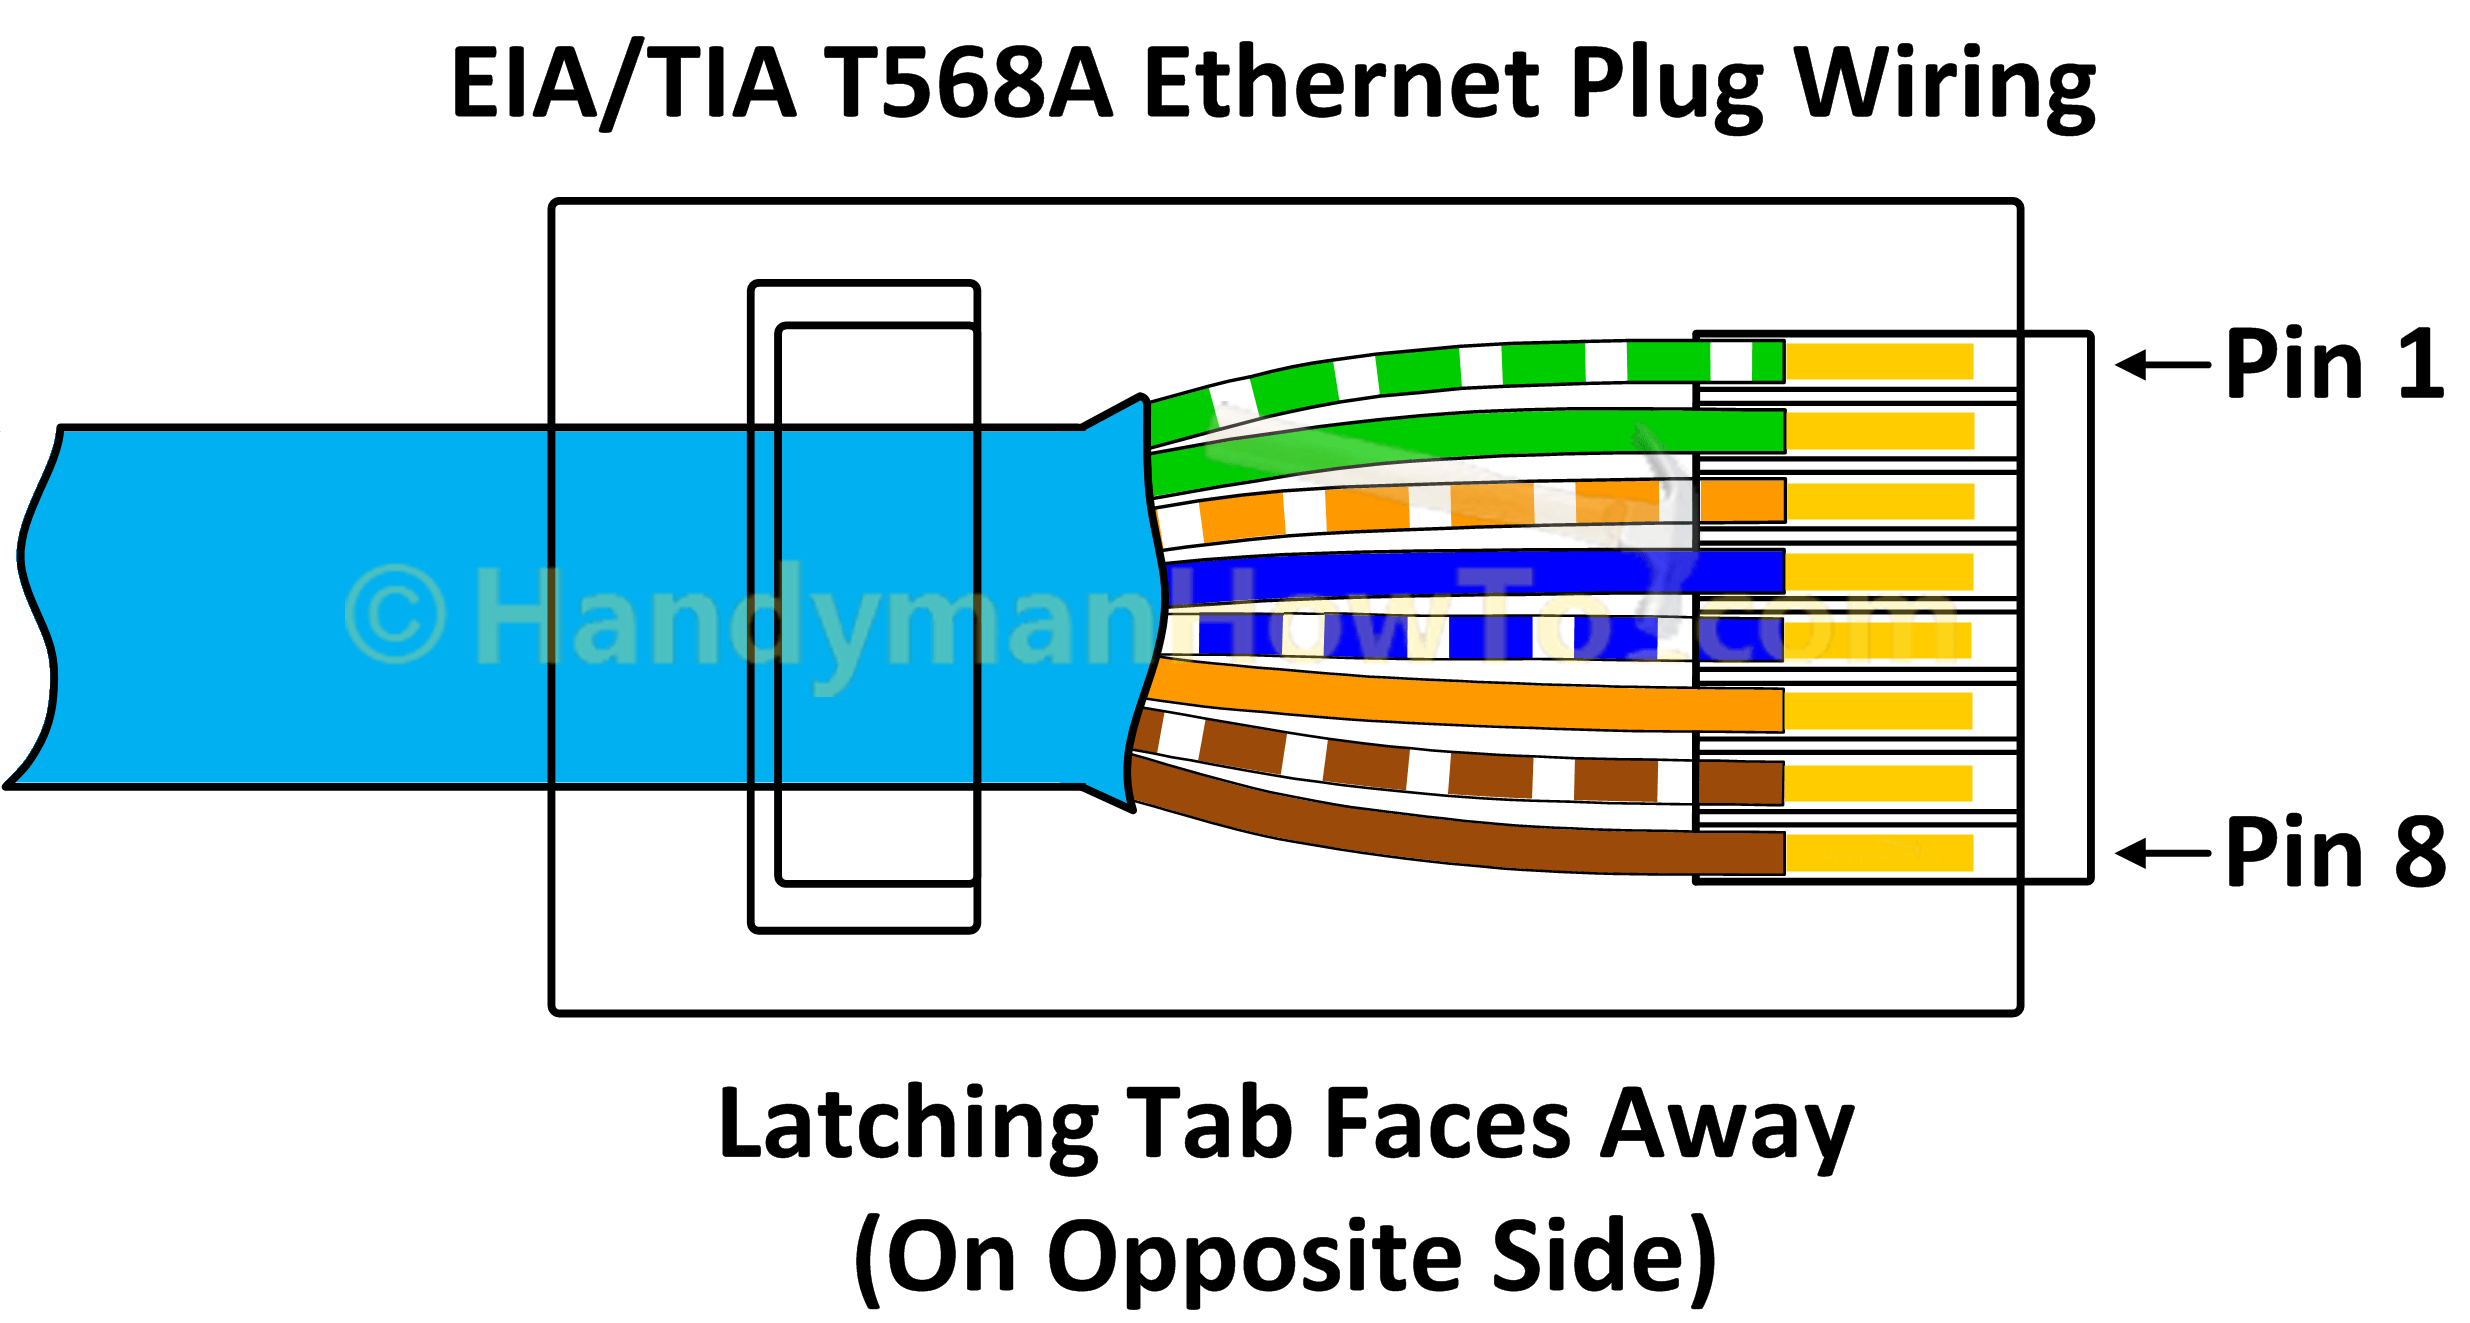 Wiring Diagram For Cat6 Cable - Wiring Diagram Detailed - Cat6 Wiring Diagram